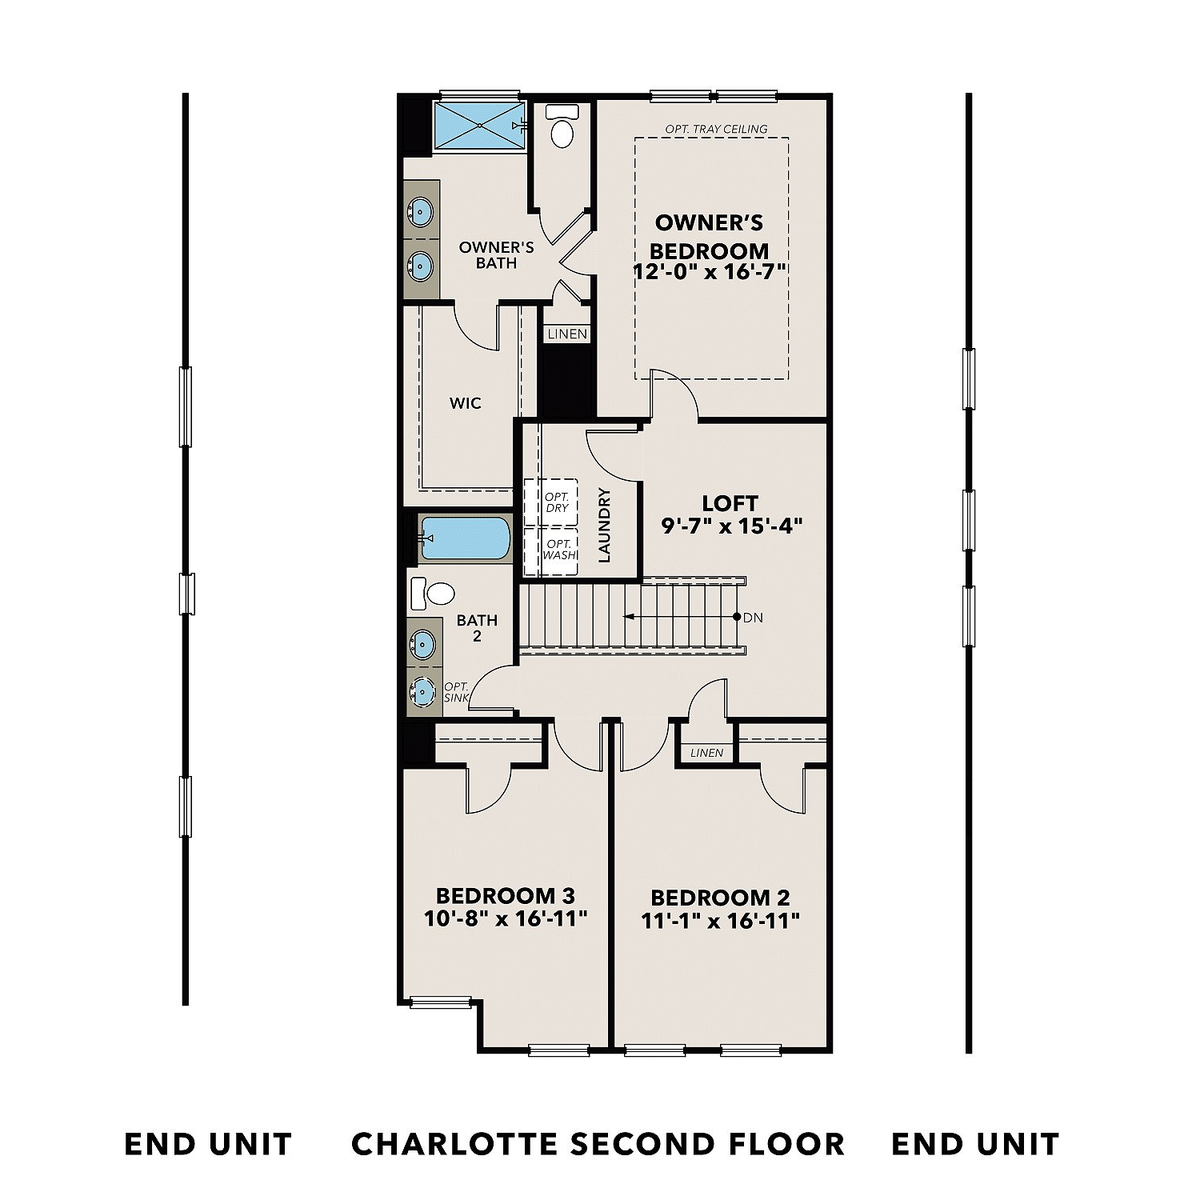 2 - The Charlotte H- Townhome floor plan layout for 521 Red Terrace in Davidson Homes' Rosehill Townhomes community.